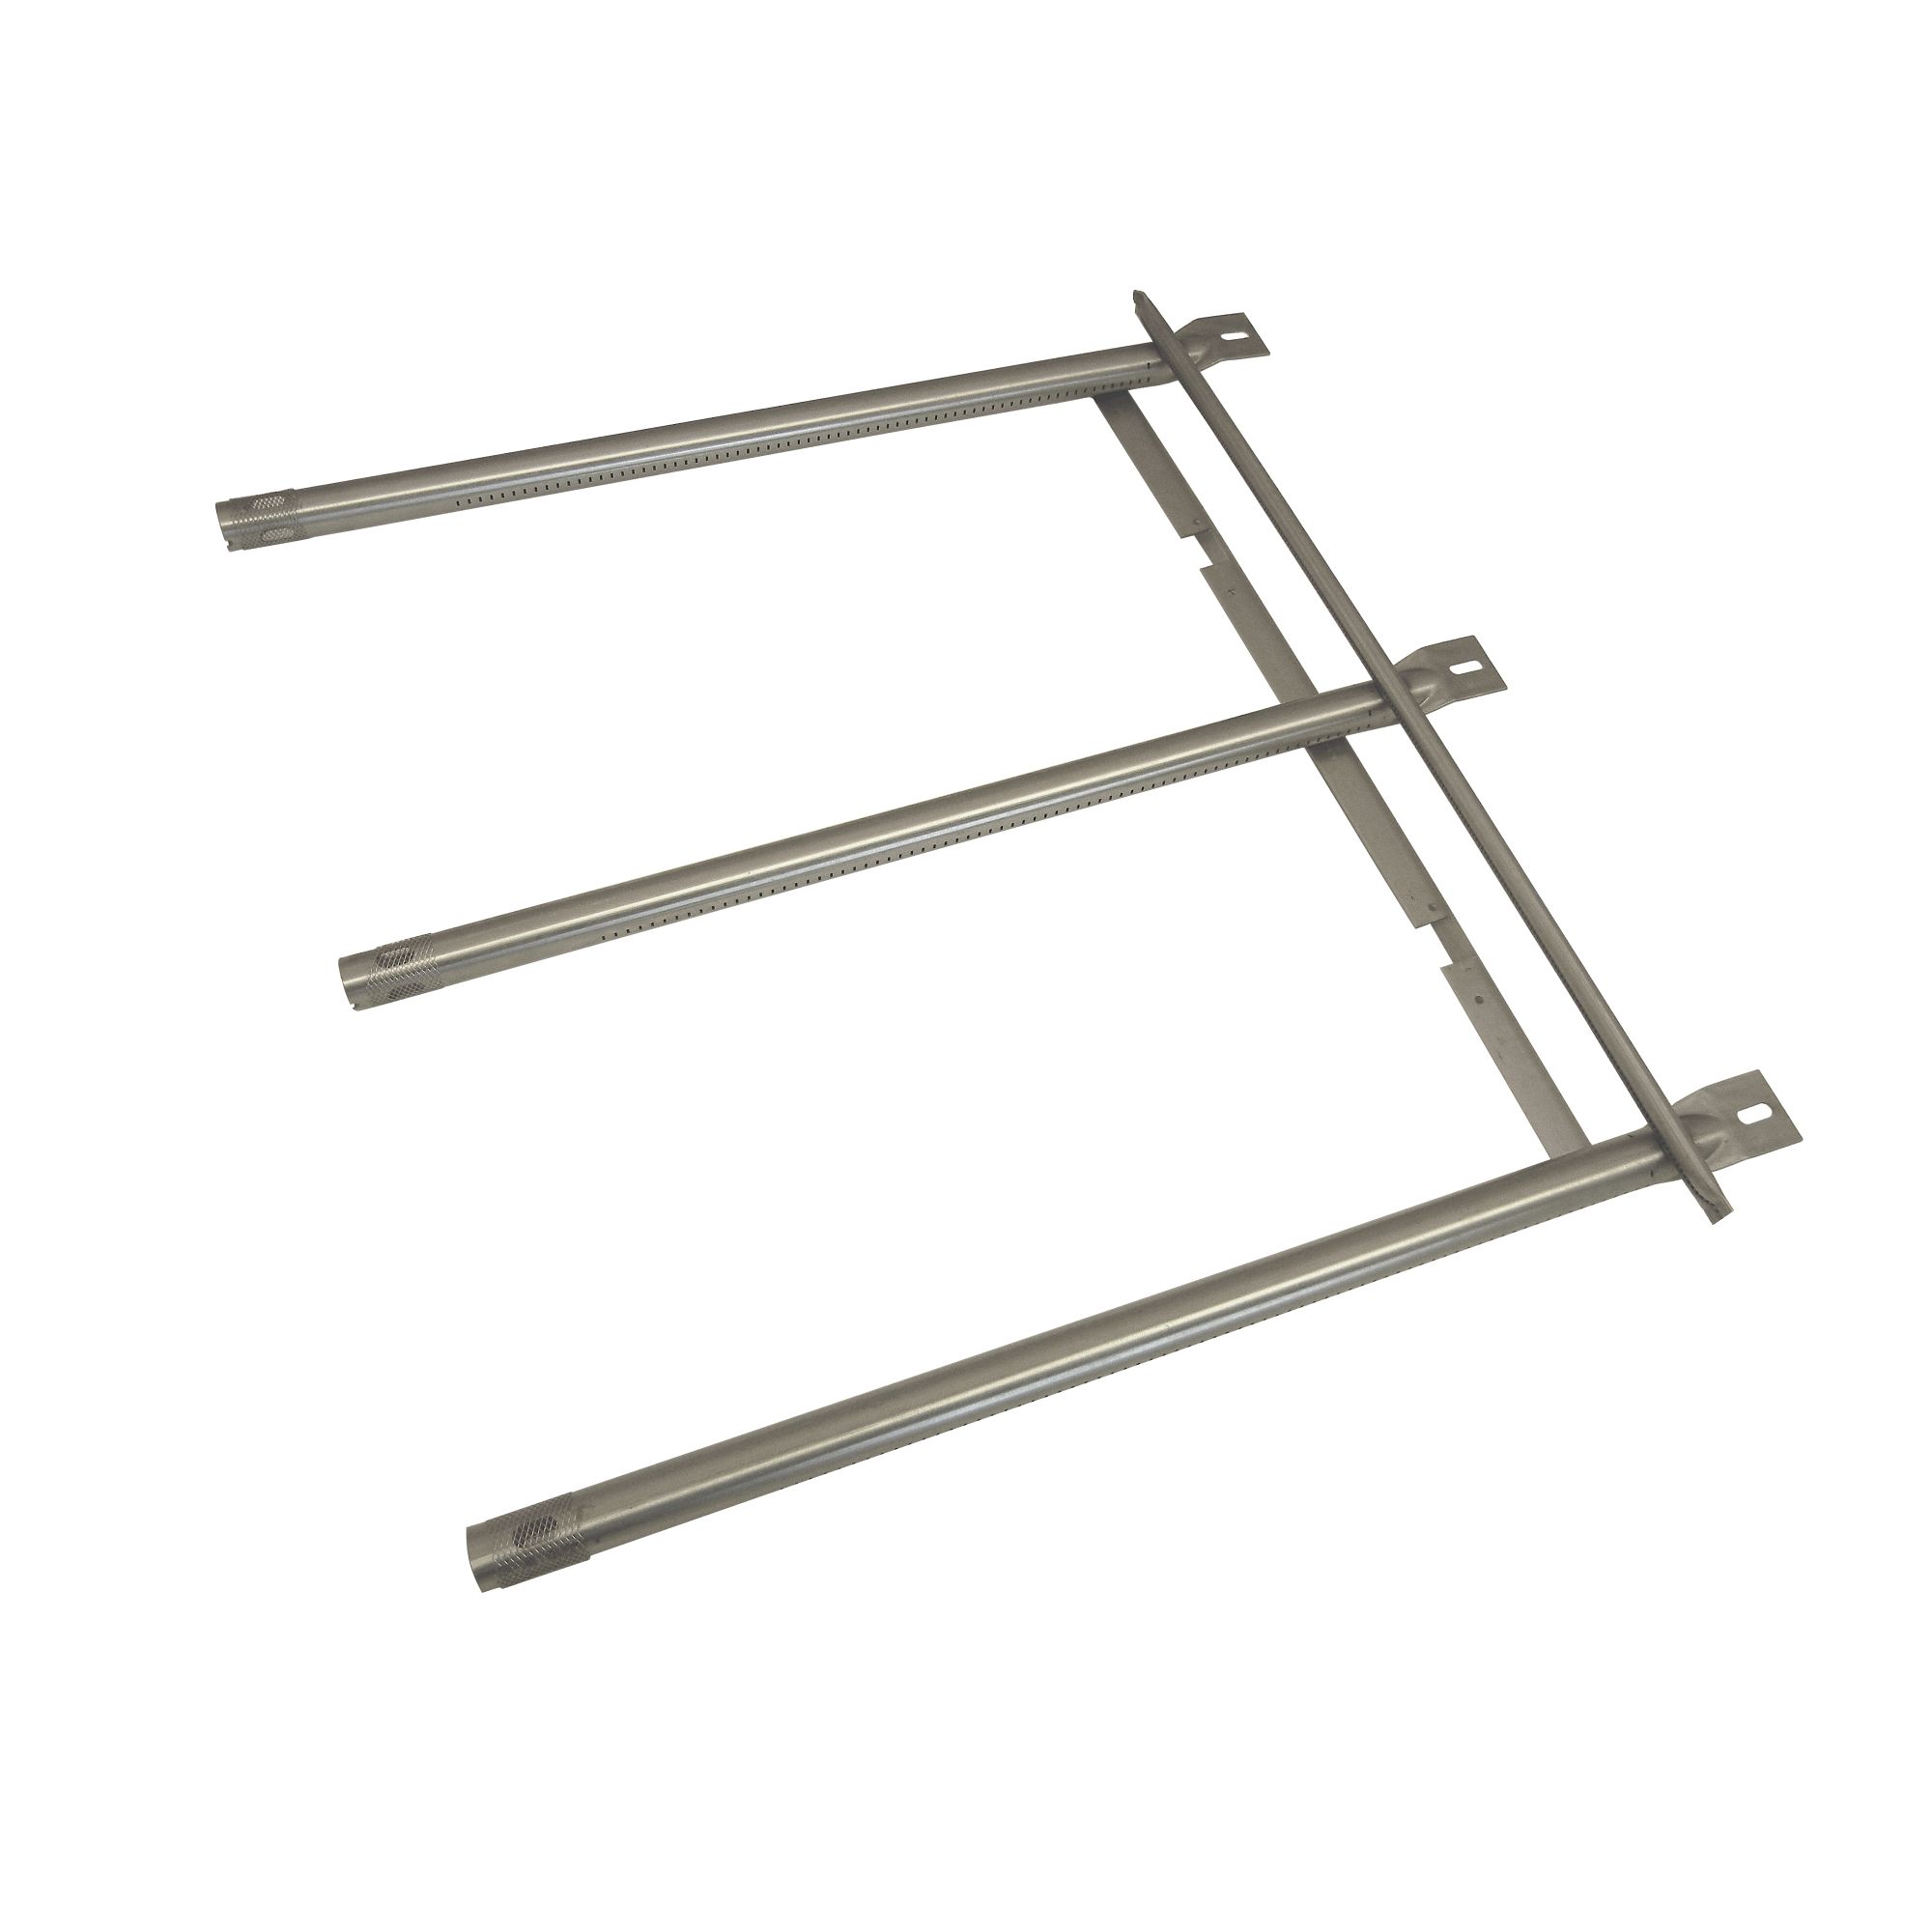 Stainless steel burner for Sonoma brand gas grills